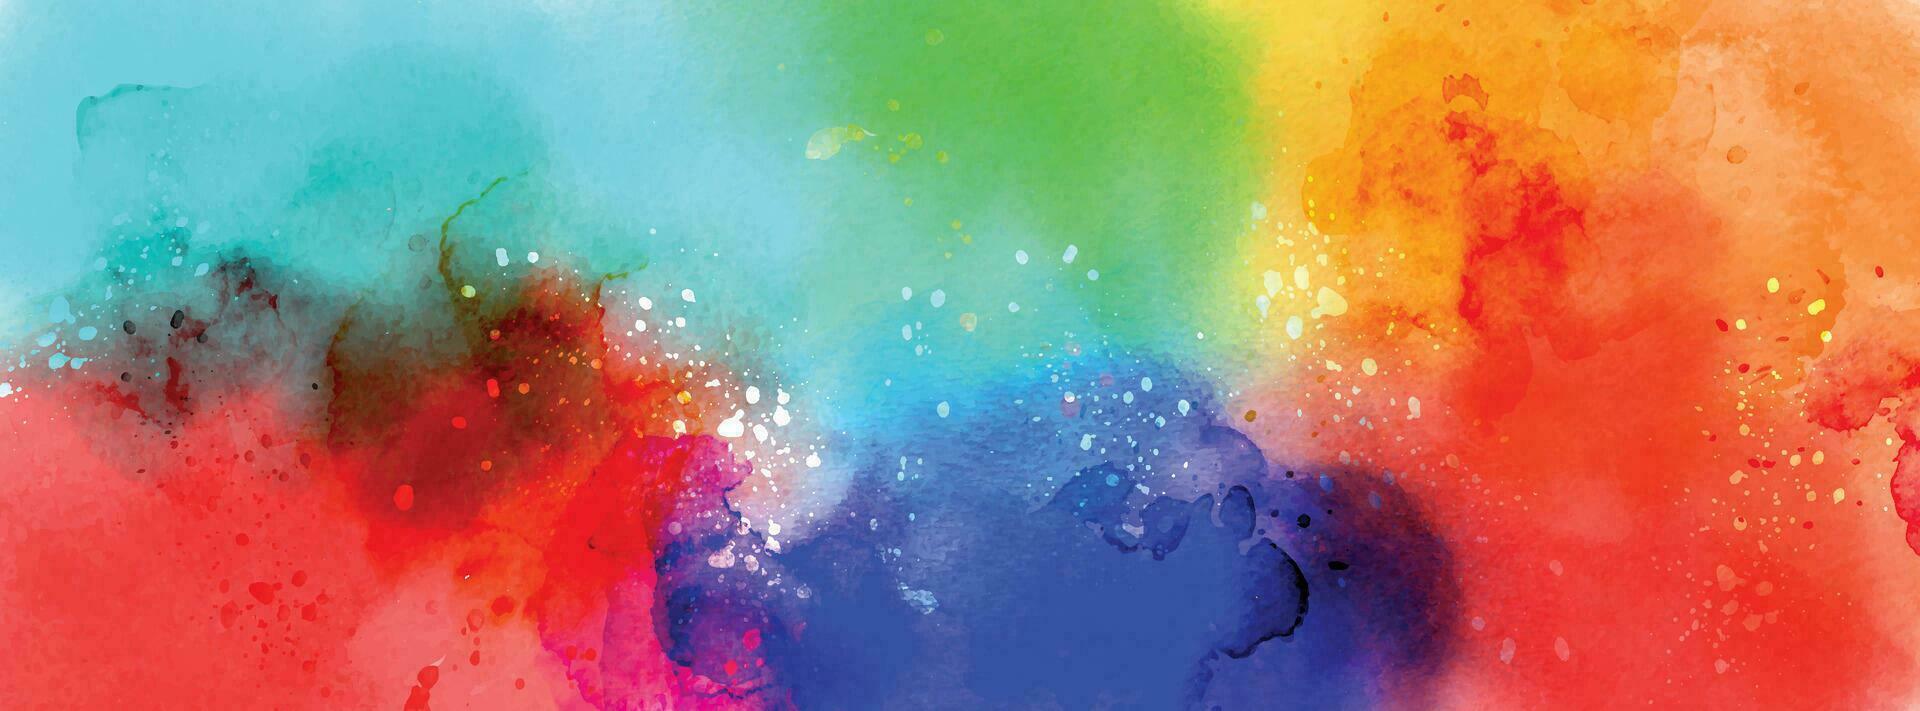 Abstract surface of fantasy splatter watercolor vector